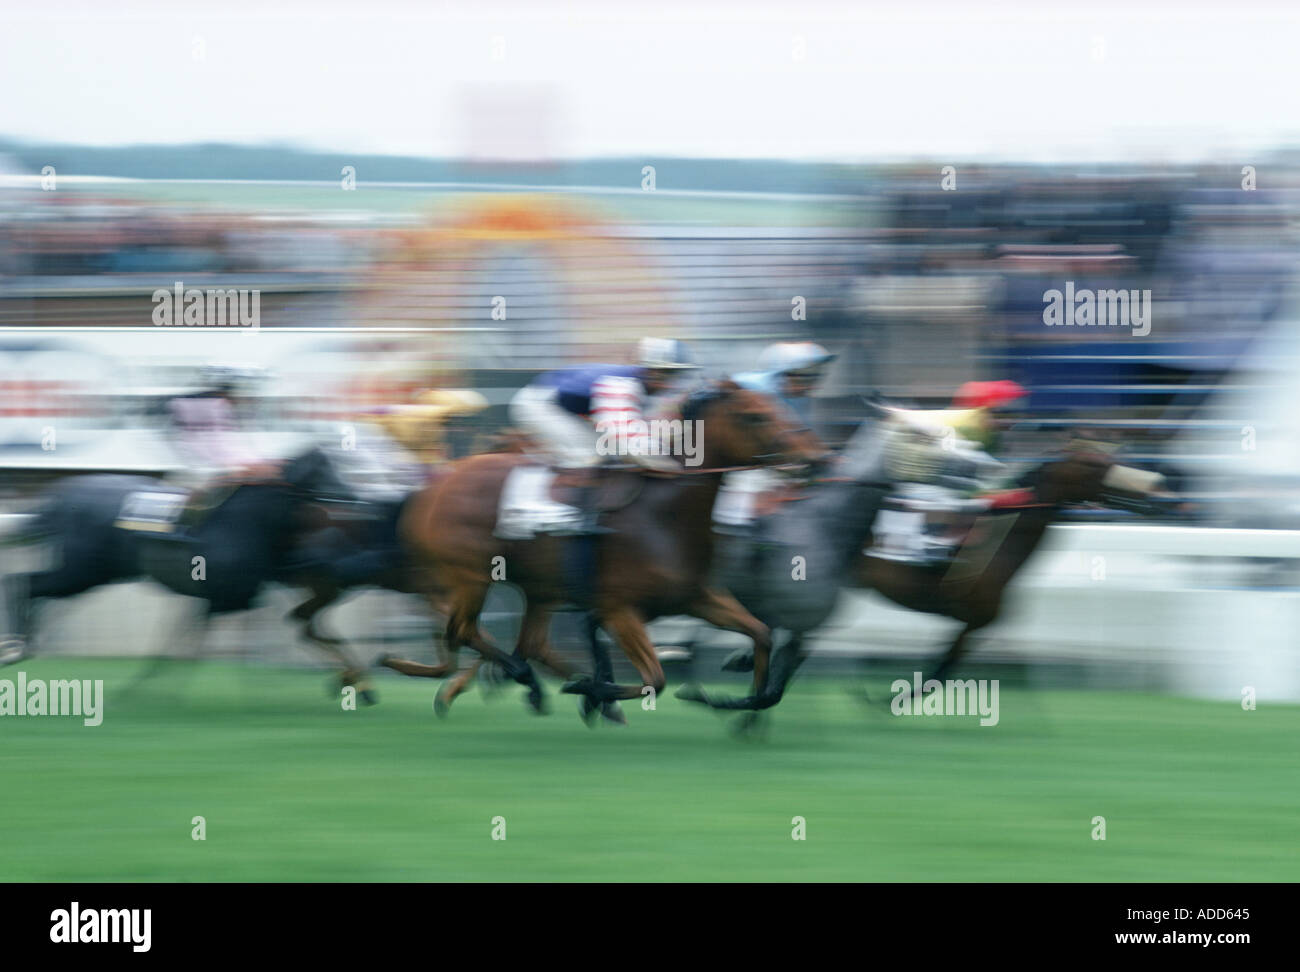 Horseracing action at Epsom Races in Surrey United Kingdom on the famous Derby Day Stock Photo